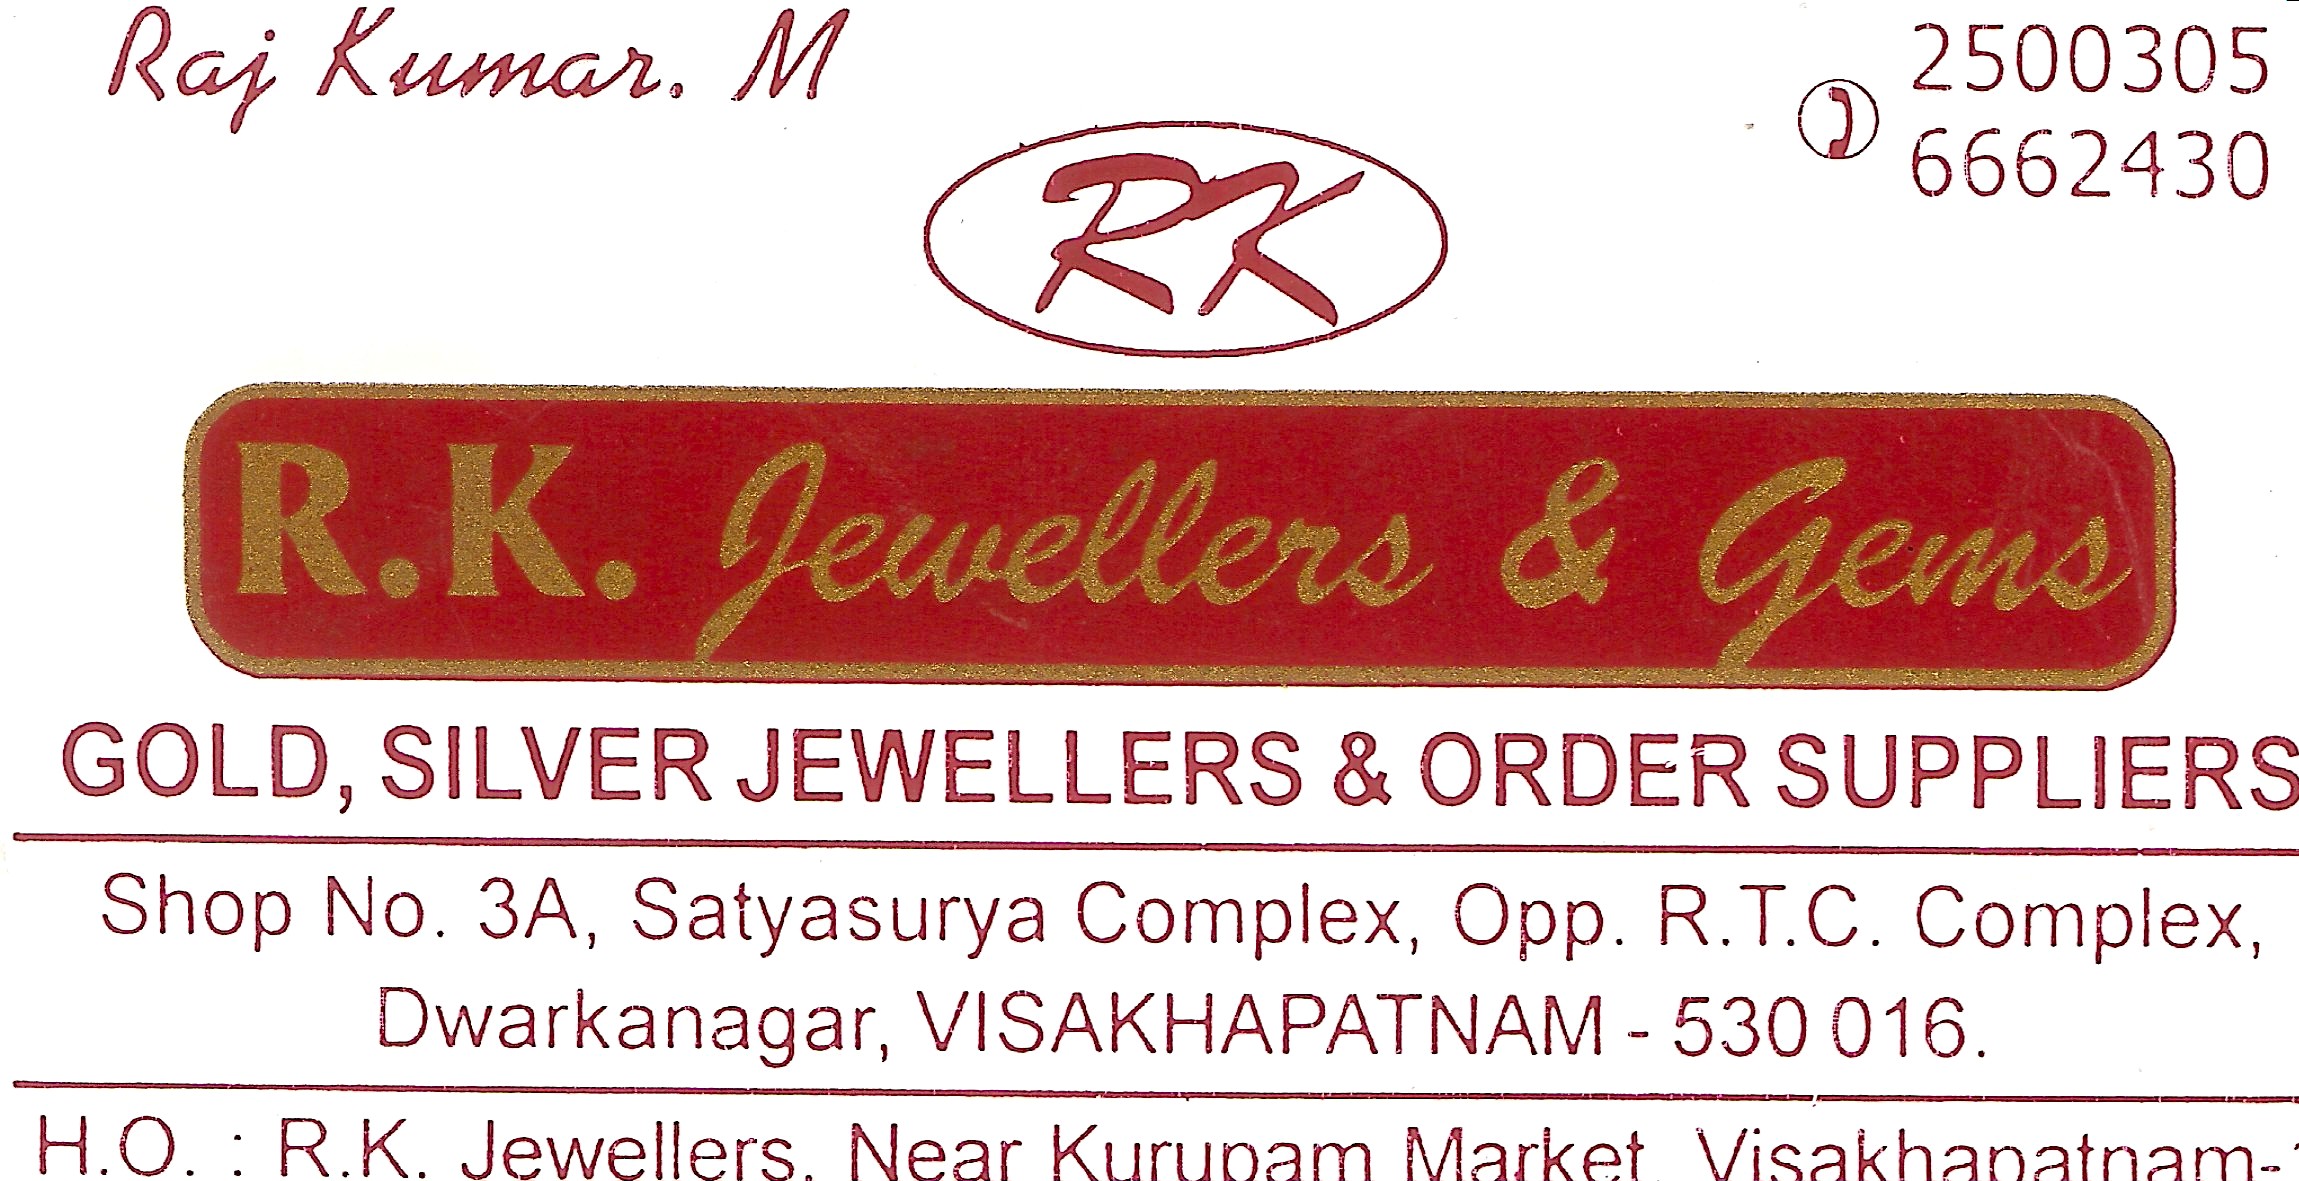 R.K.JEWELLERS&GEMS,R.K.JEWELLERS&GEMSJewellery Gem Stones,R.K.JEWELLERS&GEMSJewellery Gem StonesDwarakanagar, R.K.JEWELLERS&GEMS contact details, R.K.JEWELLERS&GEMS address, R.K.JEWELLERS&GEMS phone numbers, R.K.JEWELLERS&GEMS map, R.K.JEWELLERS&GEMS offers, Visakhapatnam Jewellery Gem Stones, Vizag Jewellery Gem Stones, Waltair Jewellery Gem Stones,Jewellery Gem Stones Yellow Pages, Jewellery Gem Stones Information, Jewellery Gem Stones Phone numbers,Jewellery Gem Stones address